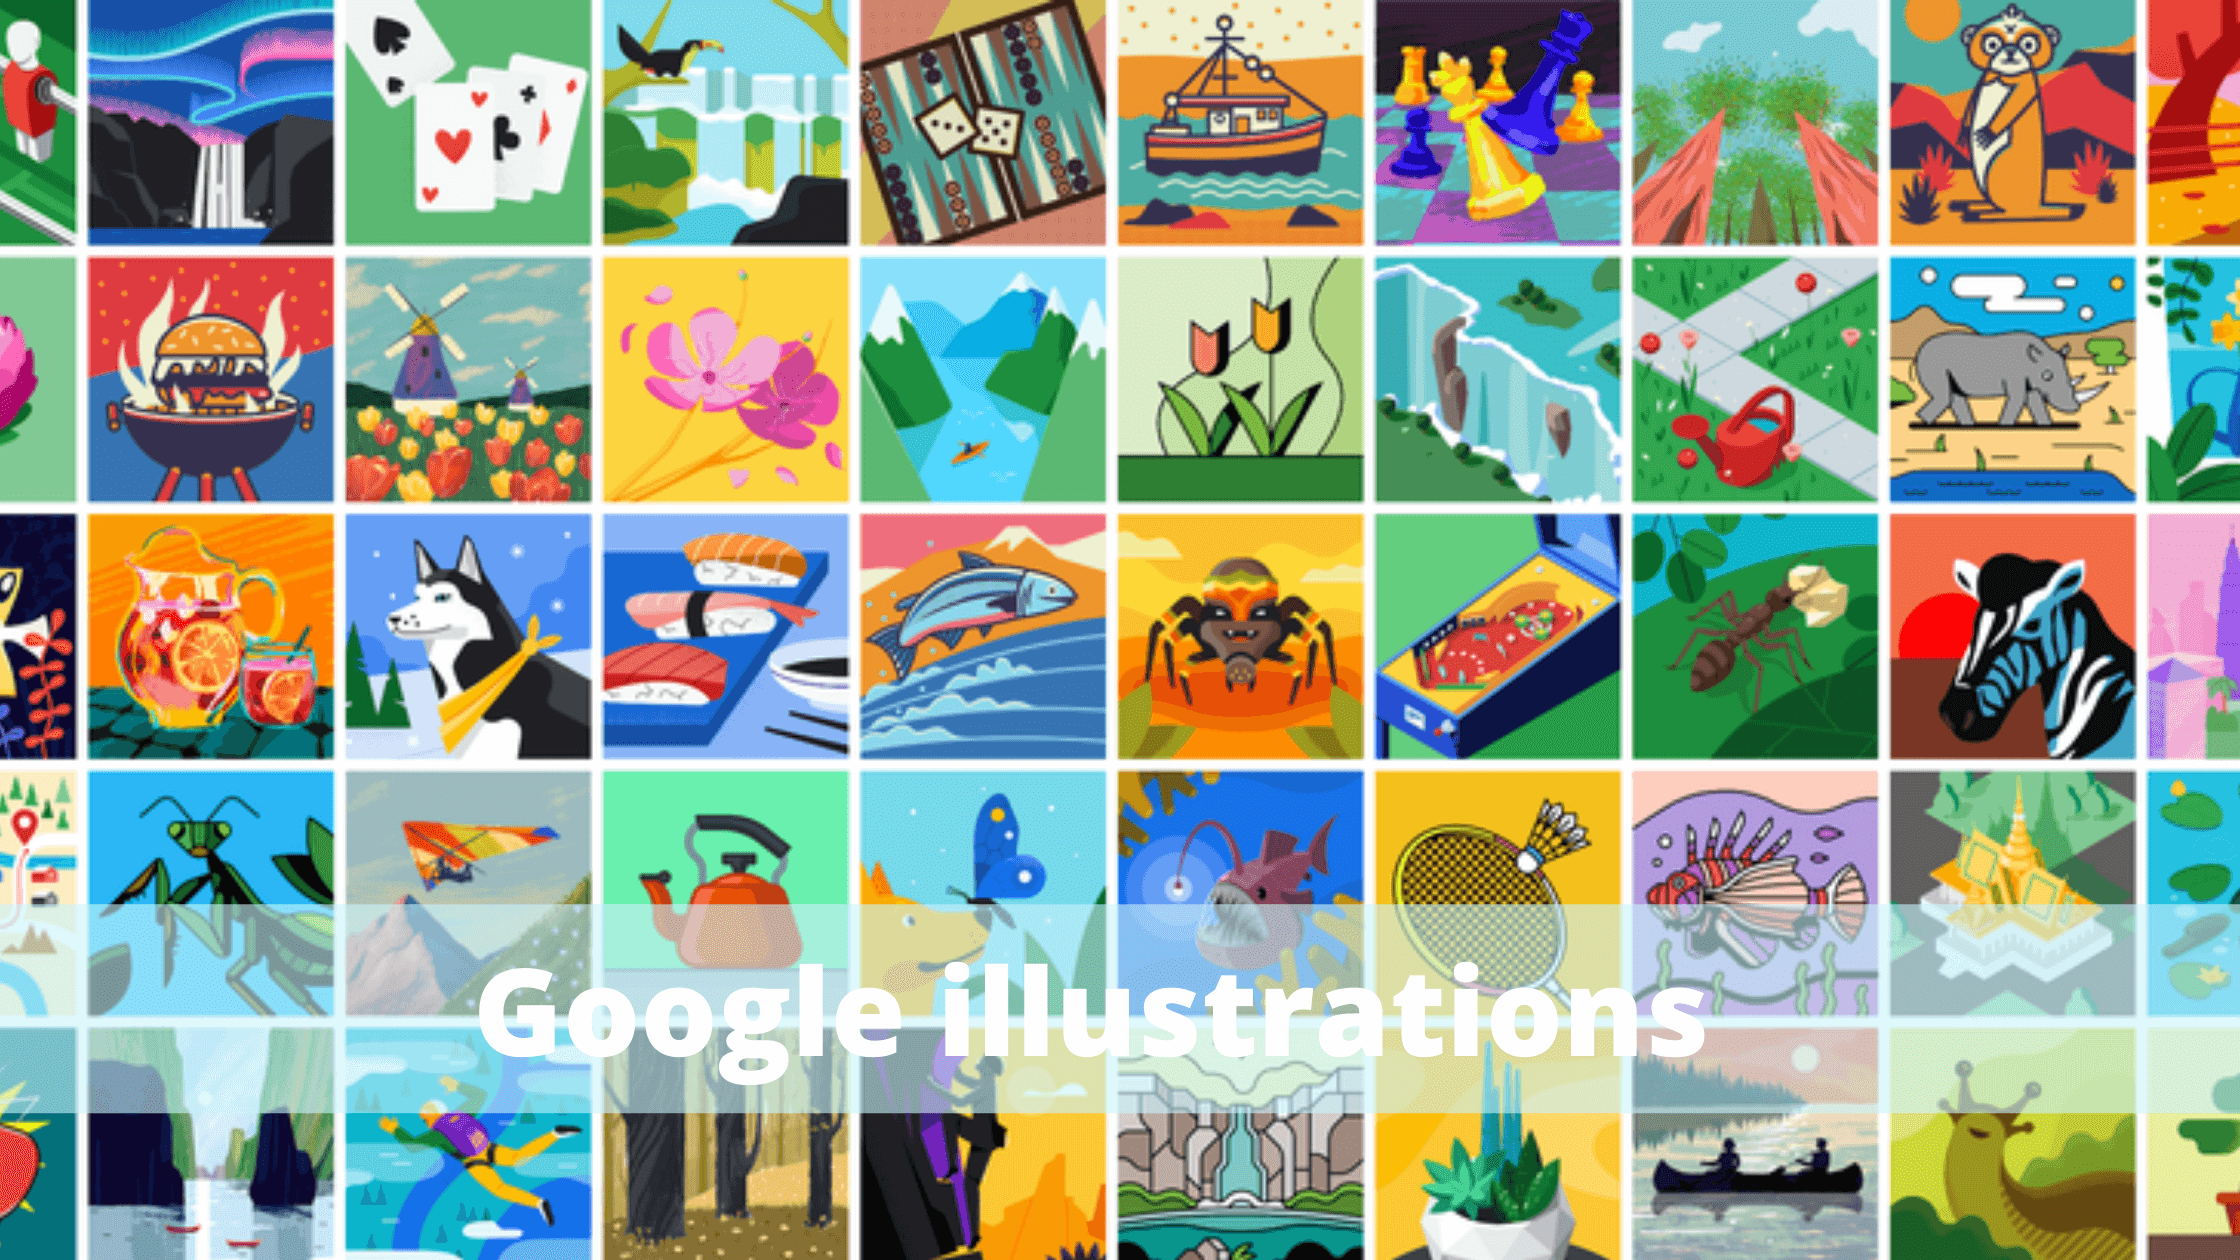 Google illustrations - New Way To Represent Yourself